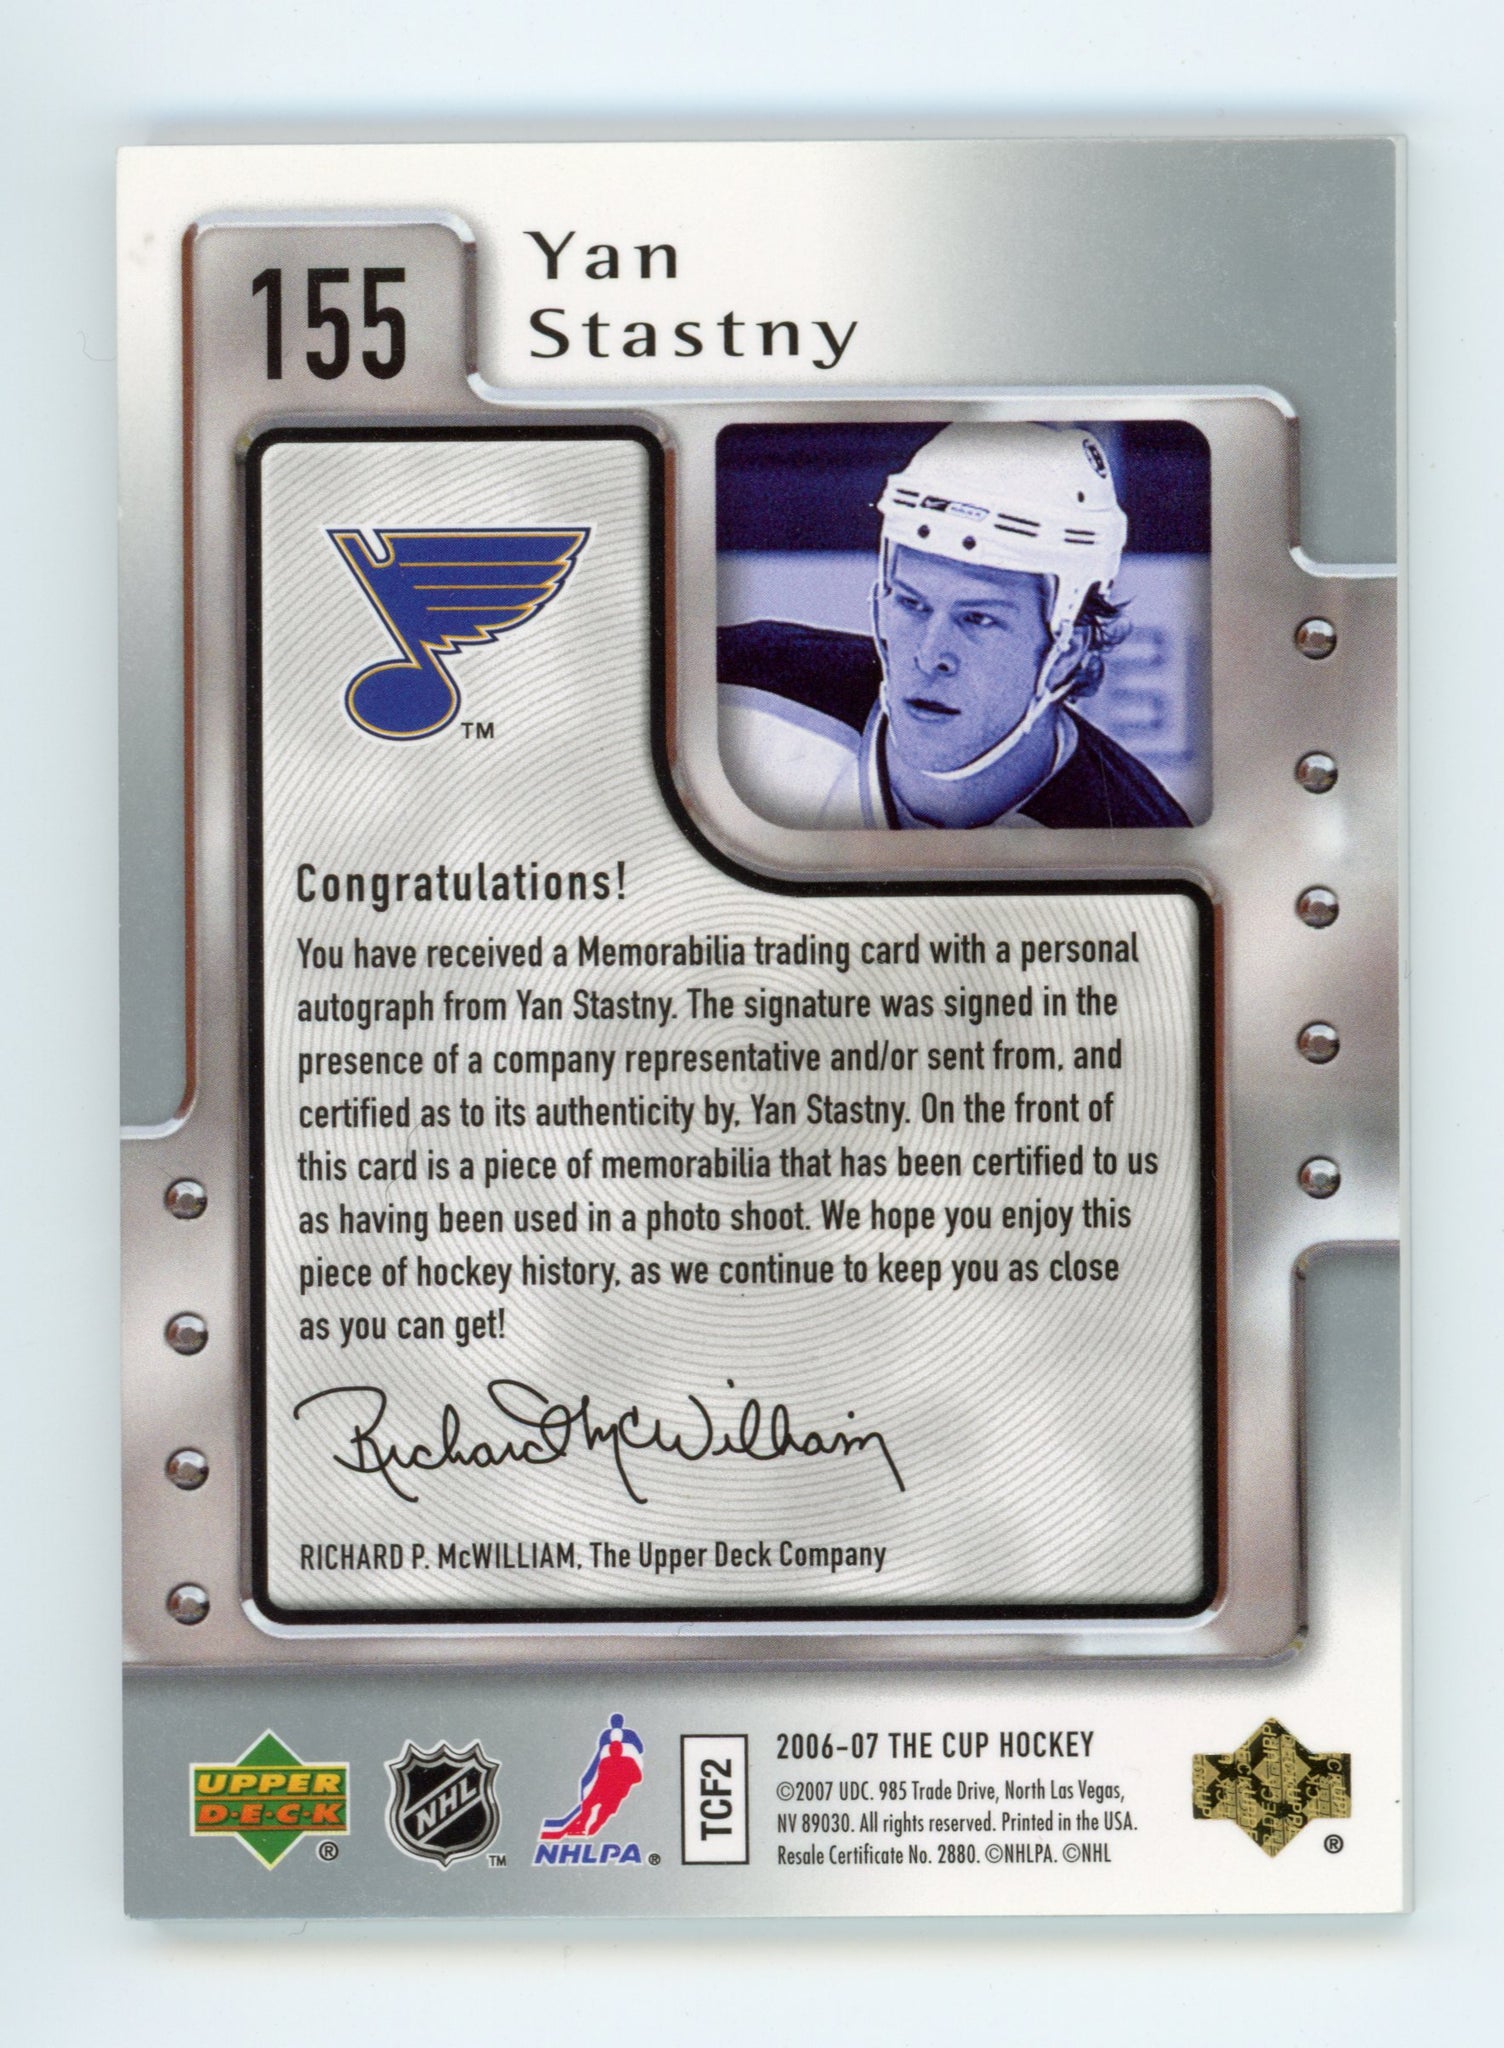 2006-2007 Yan Stastny RPA #d /249 The Cup Boston Bruins # 155